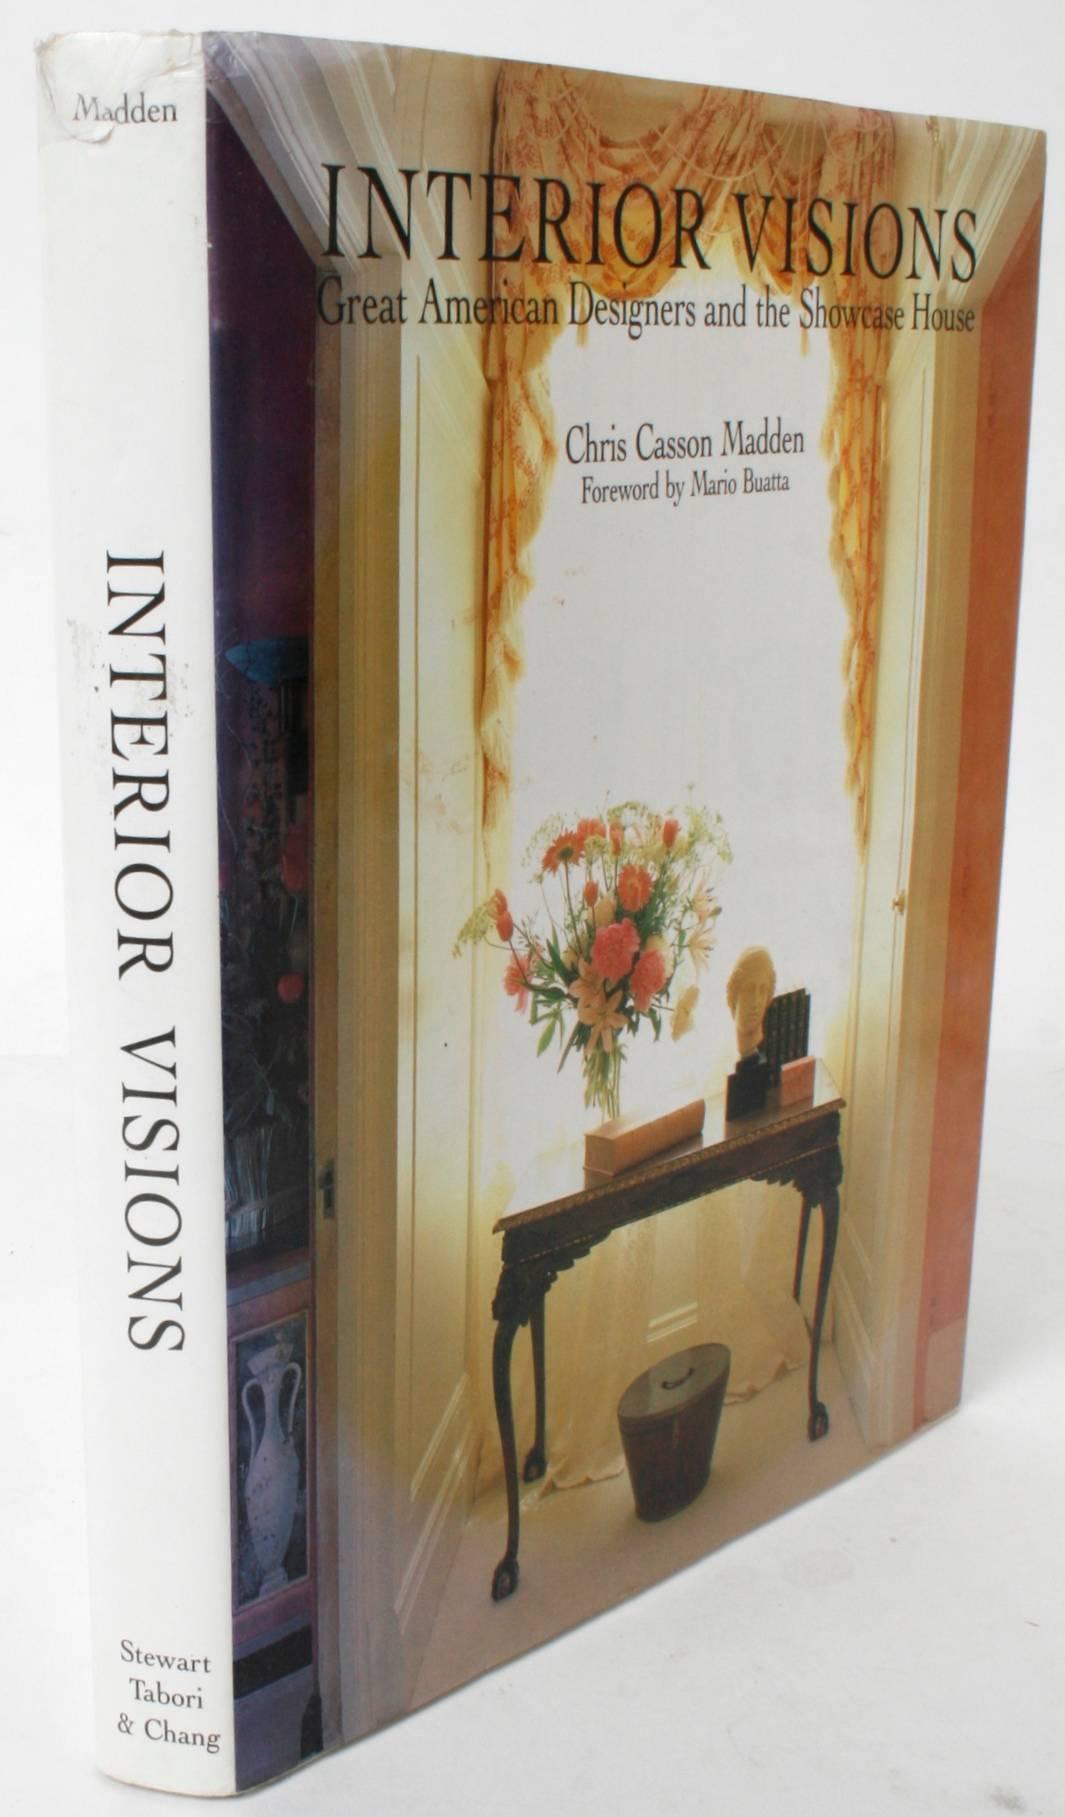 Interior Visions, Great American Designers and the Showcase House by Chris Casson Madden. New York: Stewart, Tabori & Chang, 1988. Hardcover with dust jacket. 253 pp. A beautiful book on showhouses including Kips Bay Boys' Club Decorator Show House